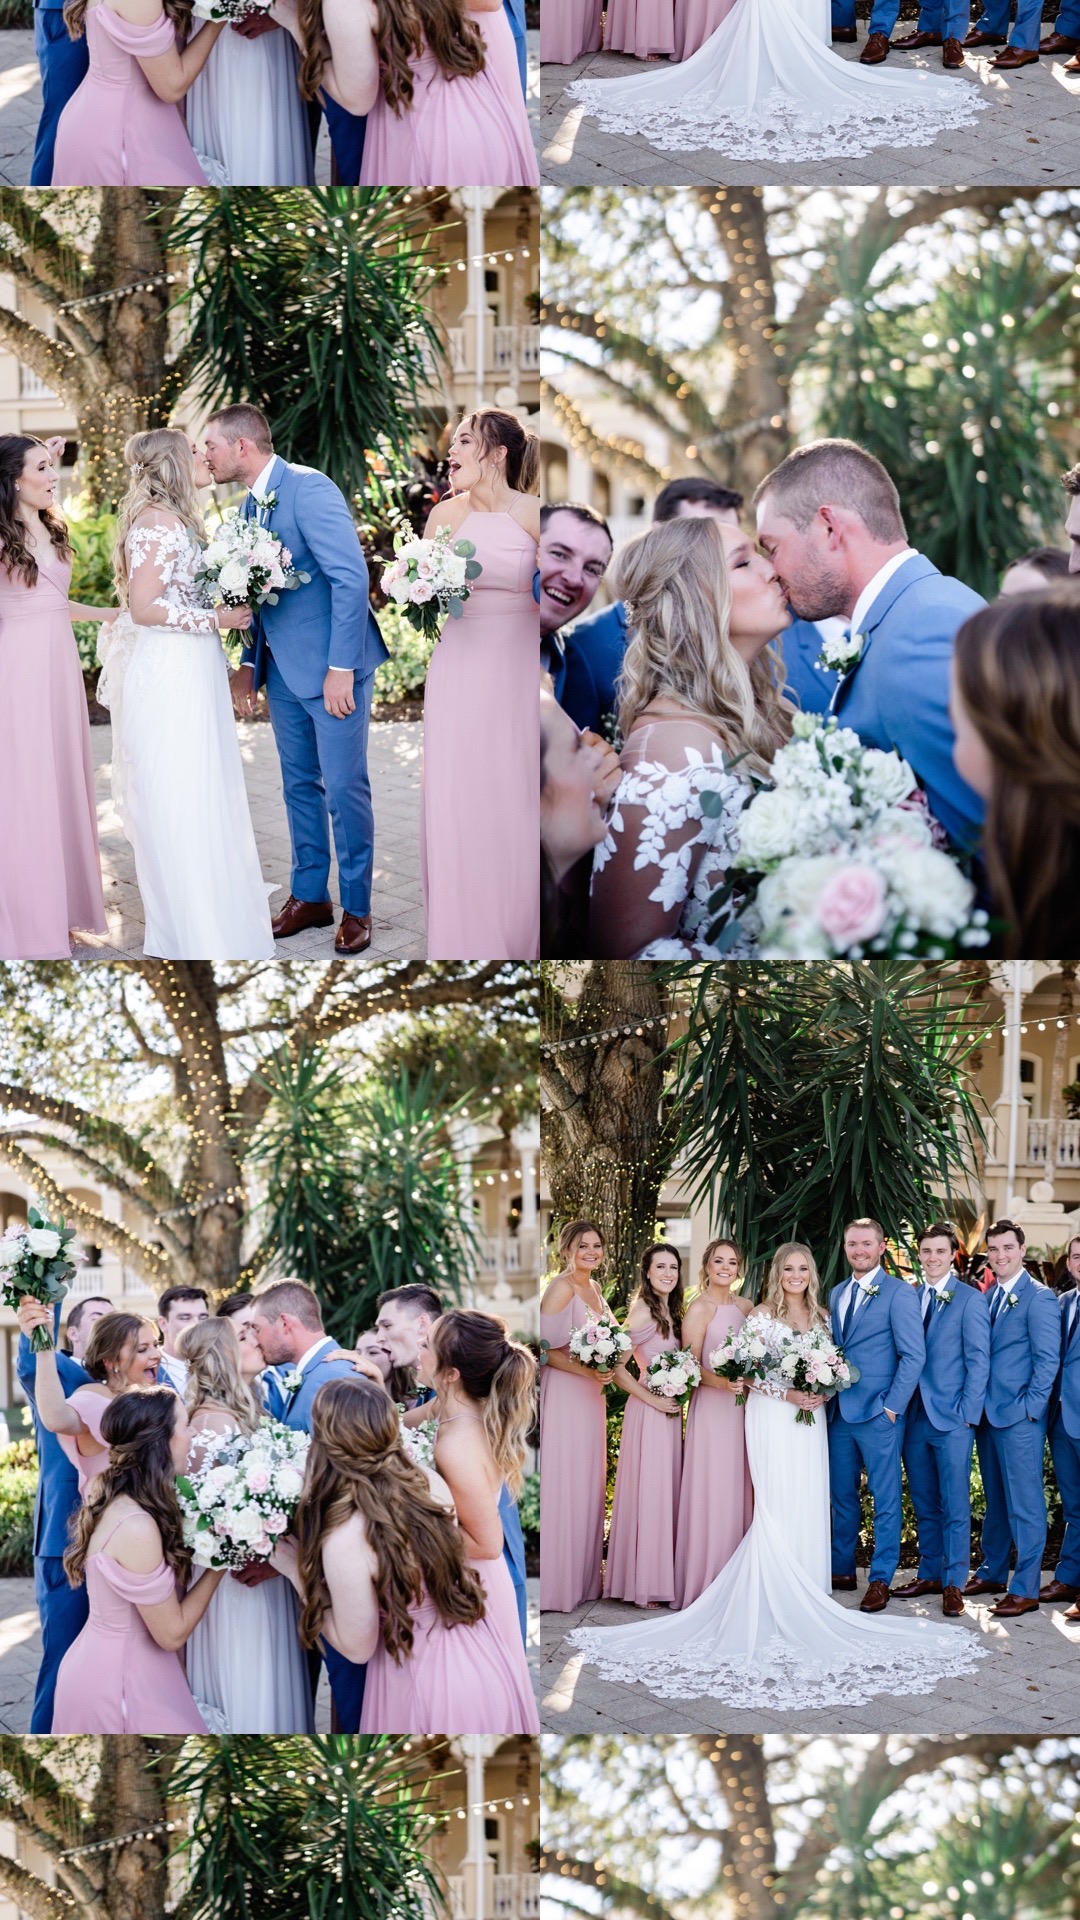 Florida bride and groom stand with bridal party. Bridesmaids wear pink bridesmaids dresses and groomsmen wear light blue groomsmen suits